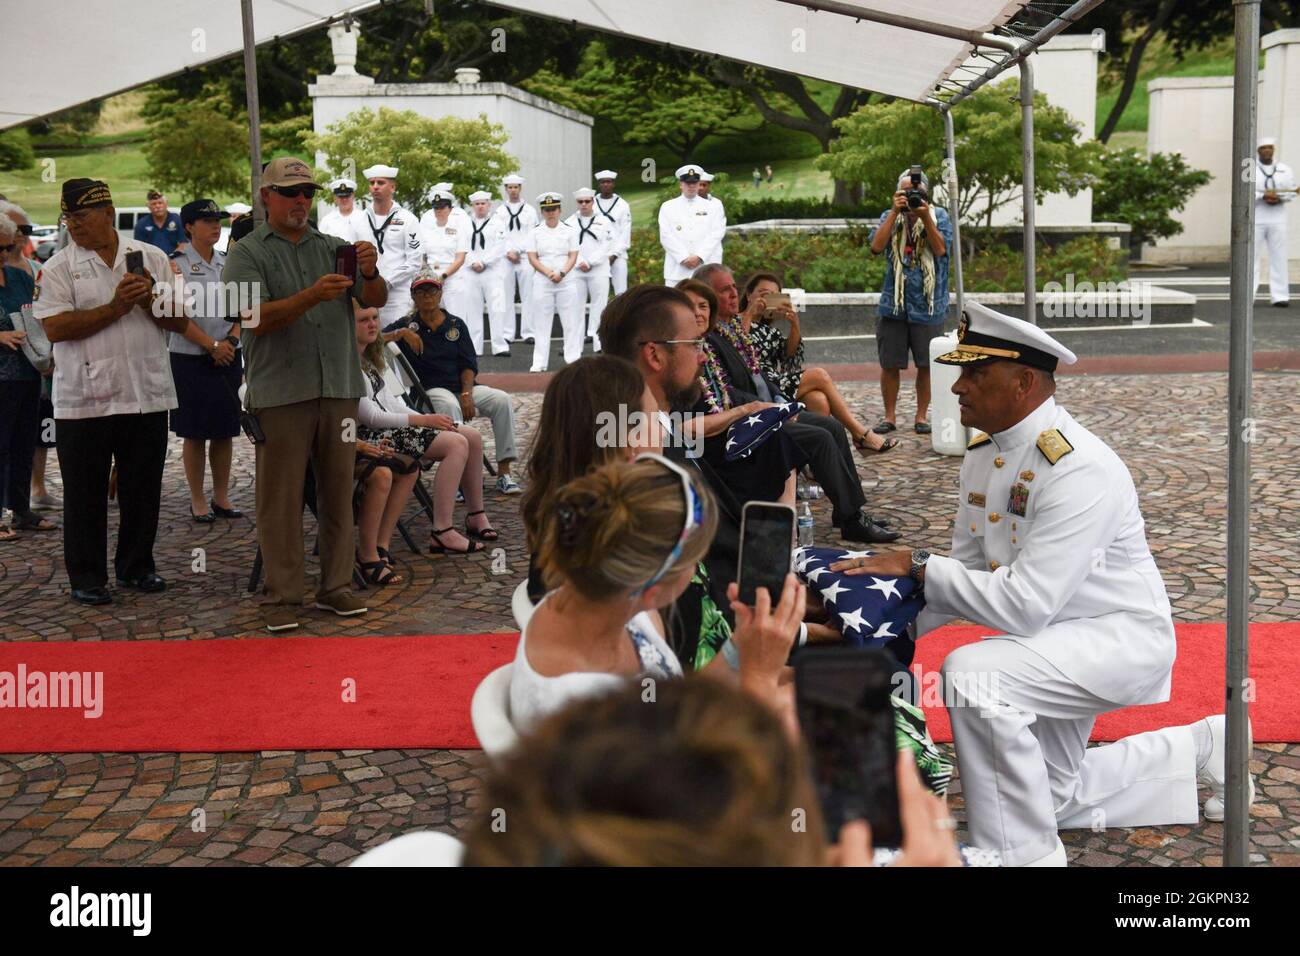 U.S. Navy Rear Adm. Darius Banaji, deputy director for operations for the Defense POW/MIA Accounting Agency (DPAA), presents an American flag to a member of the Trapp brother’s family during a funeral for the Trapp brothers at the National Memorial Cemetery of the Pacific, Honolulu, Hawaii, June 15, 2021. The Trapp brothers were assigned to the USS Oklahoma, which sustained fire from Japanese aircraft and multiple torpedo hits causing the ship to capsize and resulted in the deaths of more than 400 crew members on Dec. 7, 1941, at Ford Island, Pearl Harbor. The Trapp brothers were recently iden Stock Photo